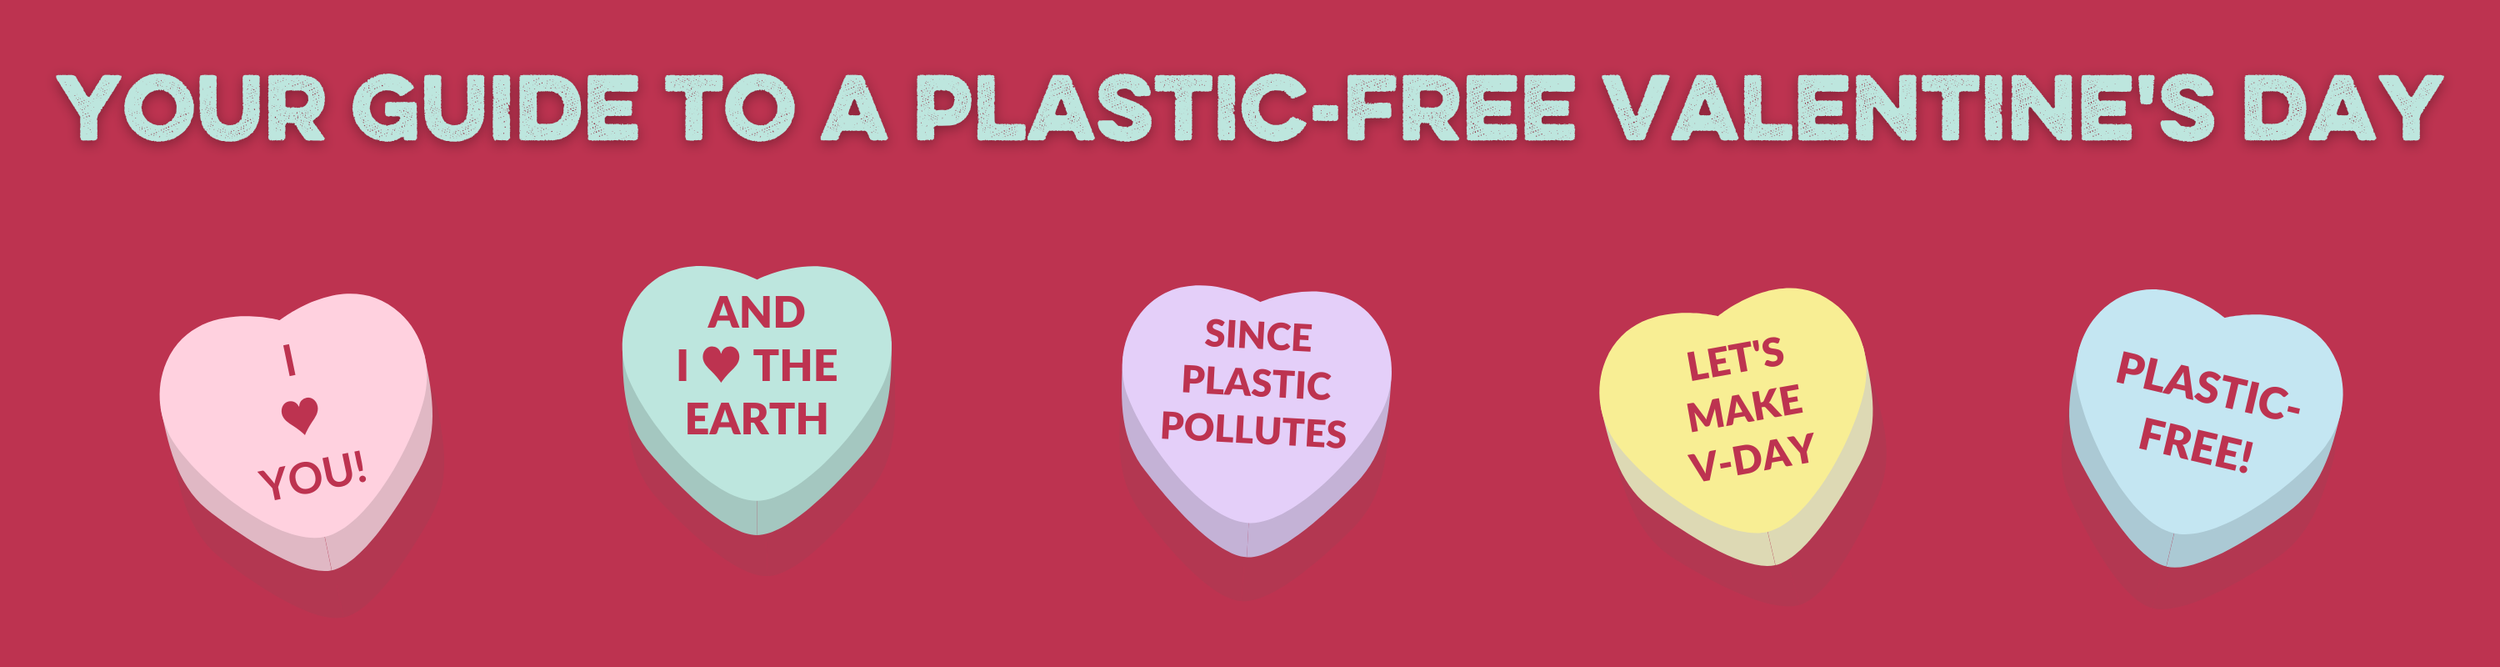 10 Fantastic Plastic-Free Valentine's Day Gifts — Beyond Plastics - Working  To End Single-Use Plastic Pollution